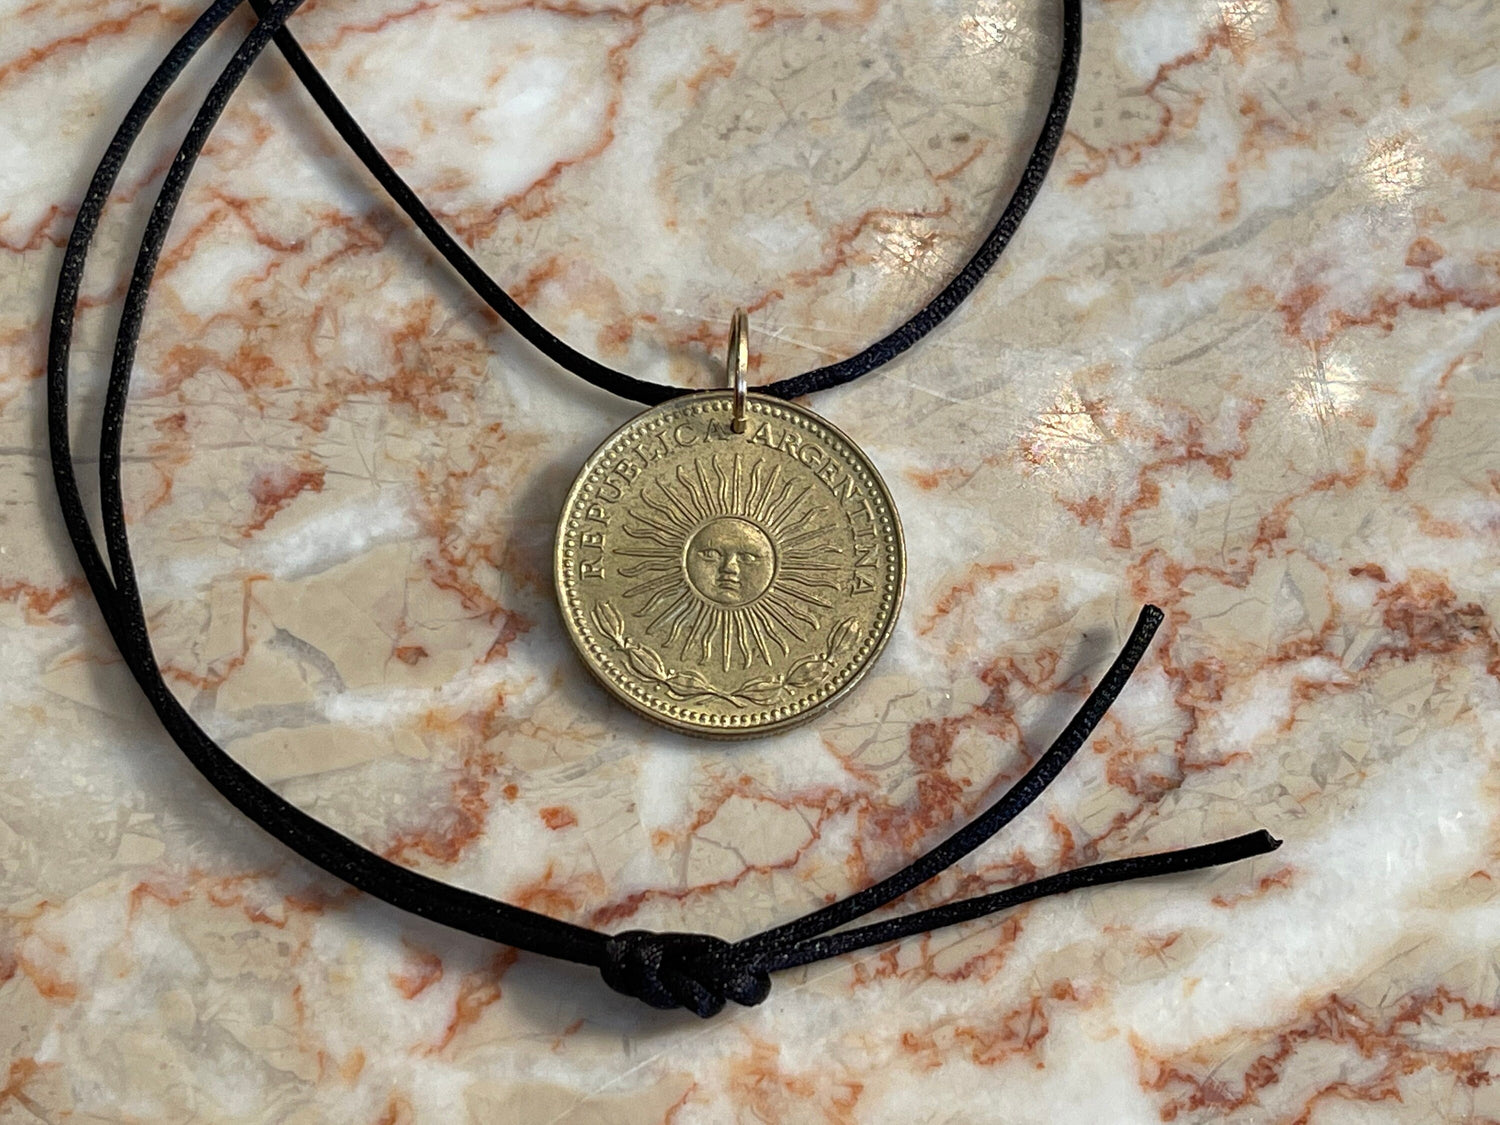 Custom coin pendant necklace made to order or kit, choose style, any coin, leather cord, beads, assorted closures, your choice color scheme